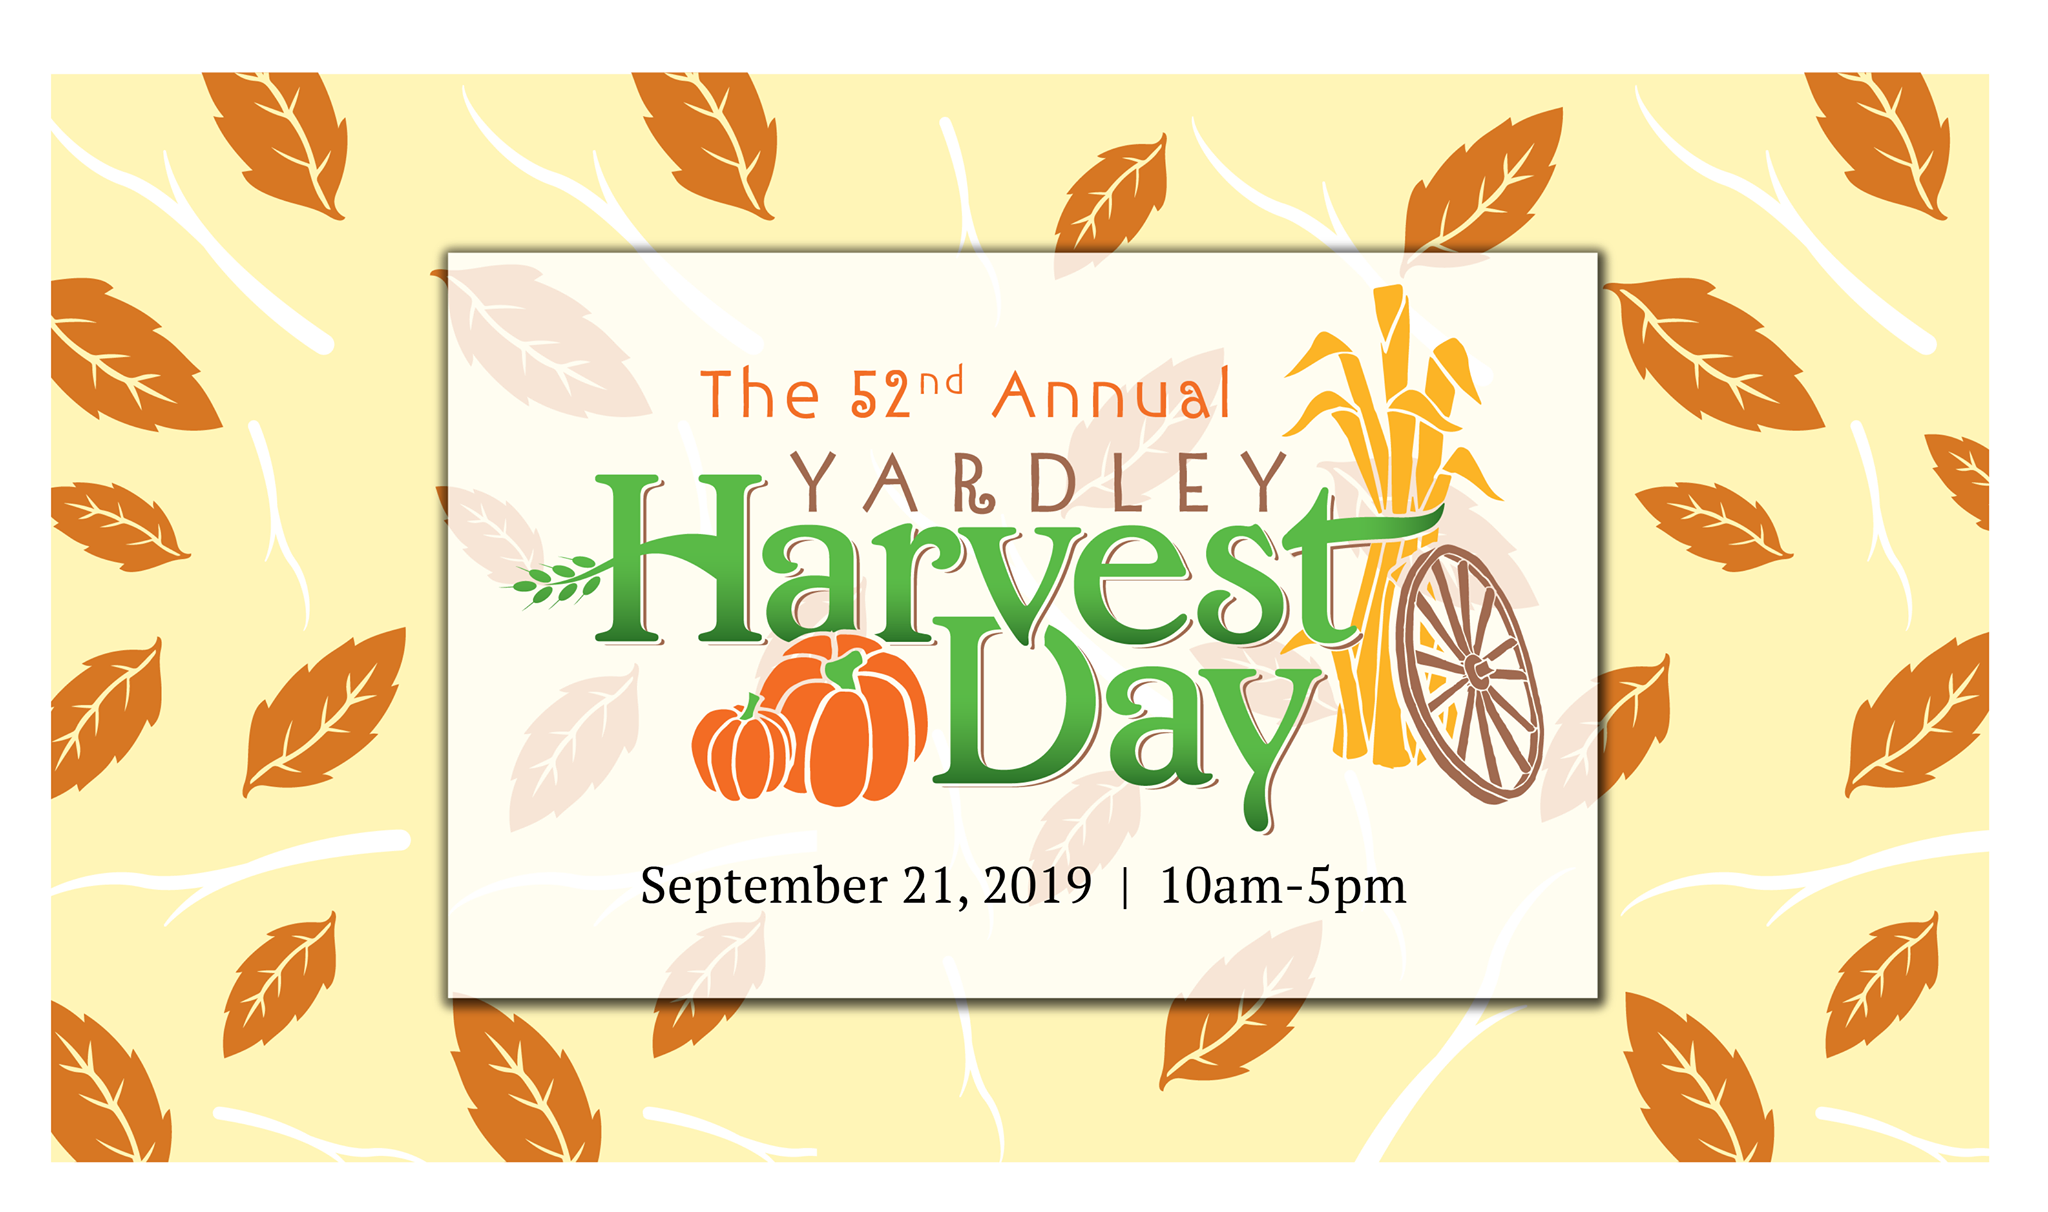 Yardley Harvest Day 2019! Delaware River Towns Local